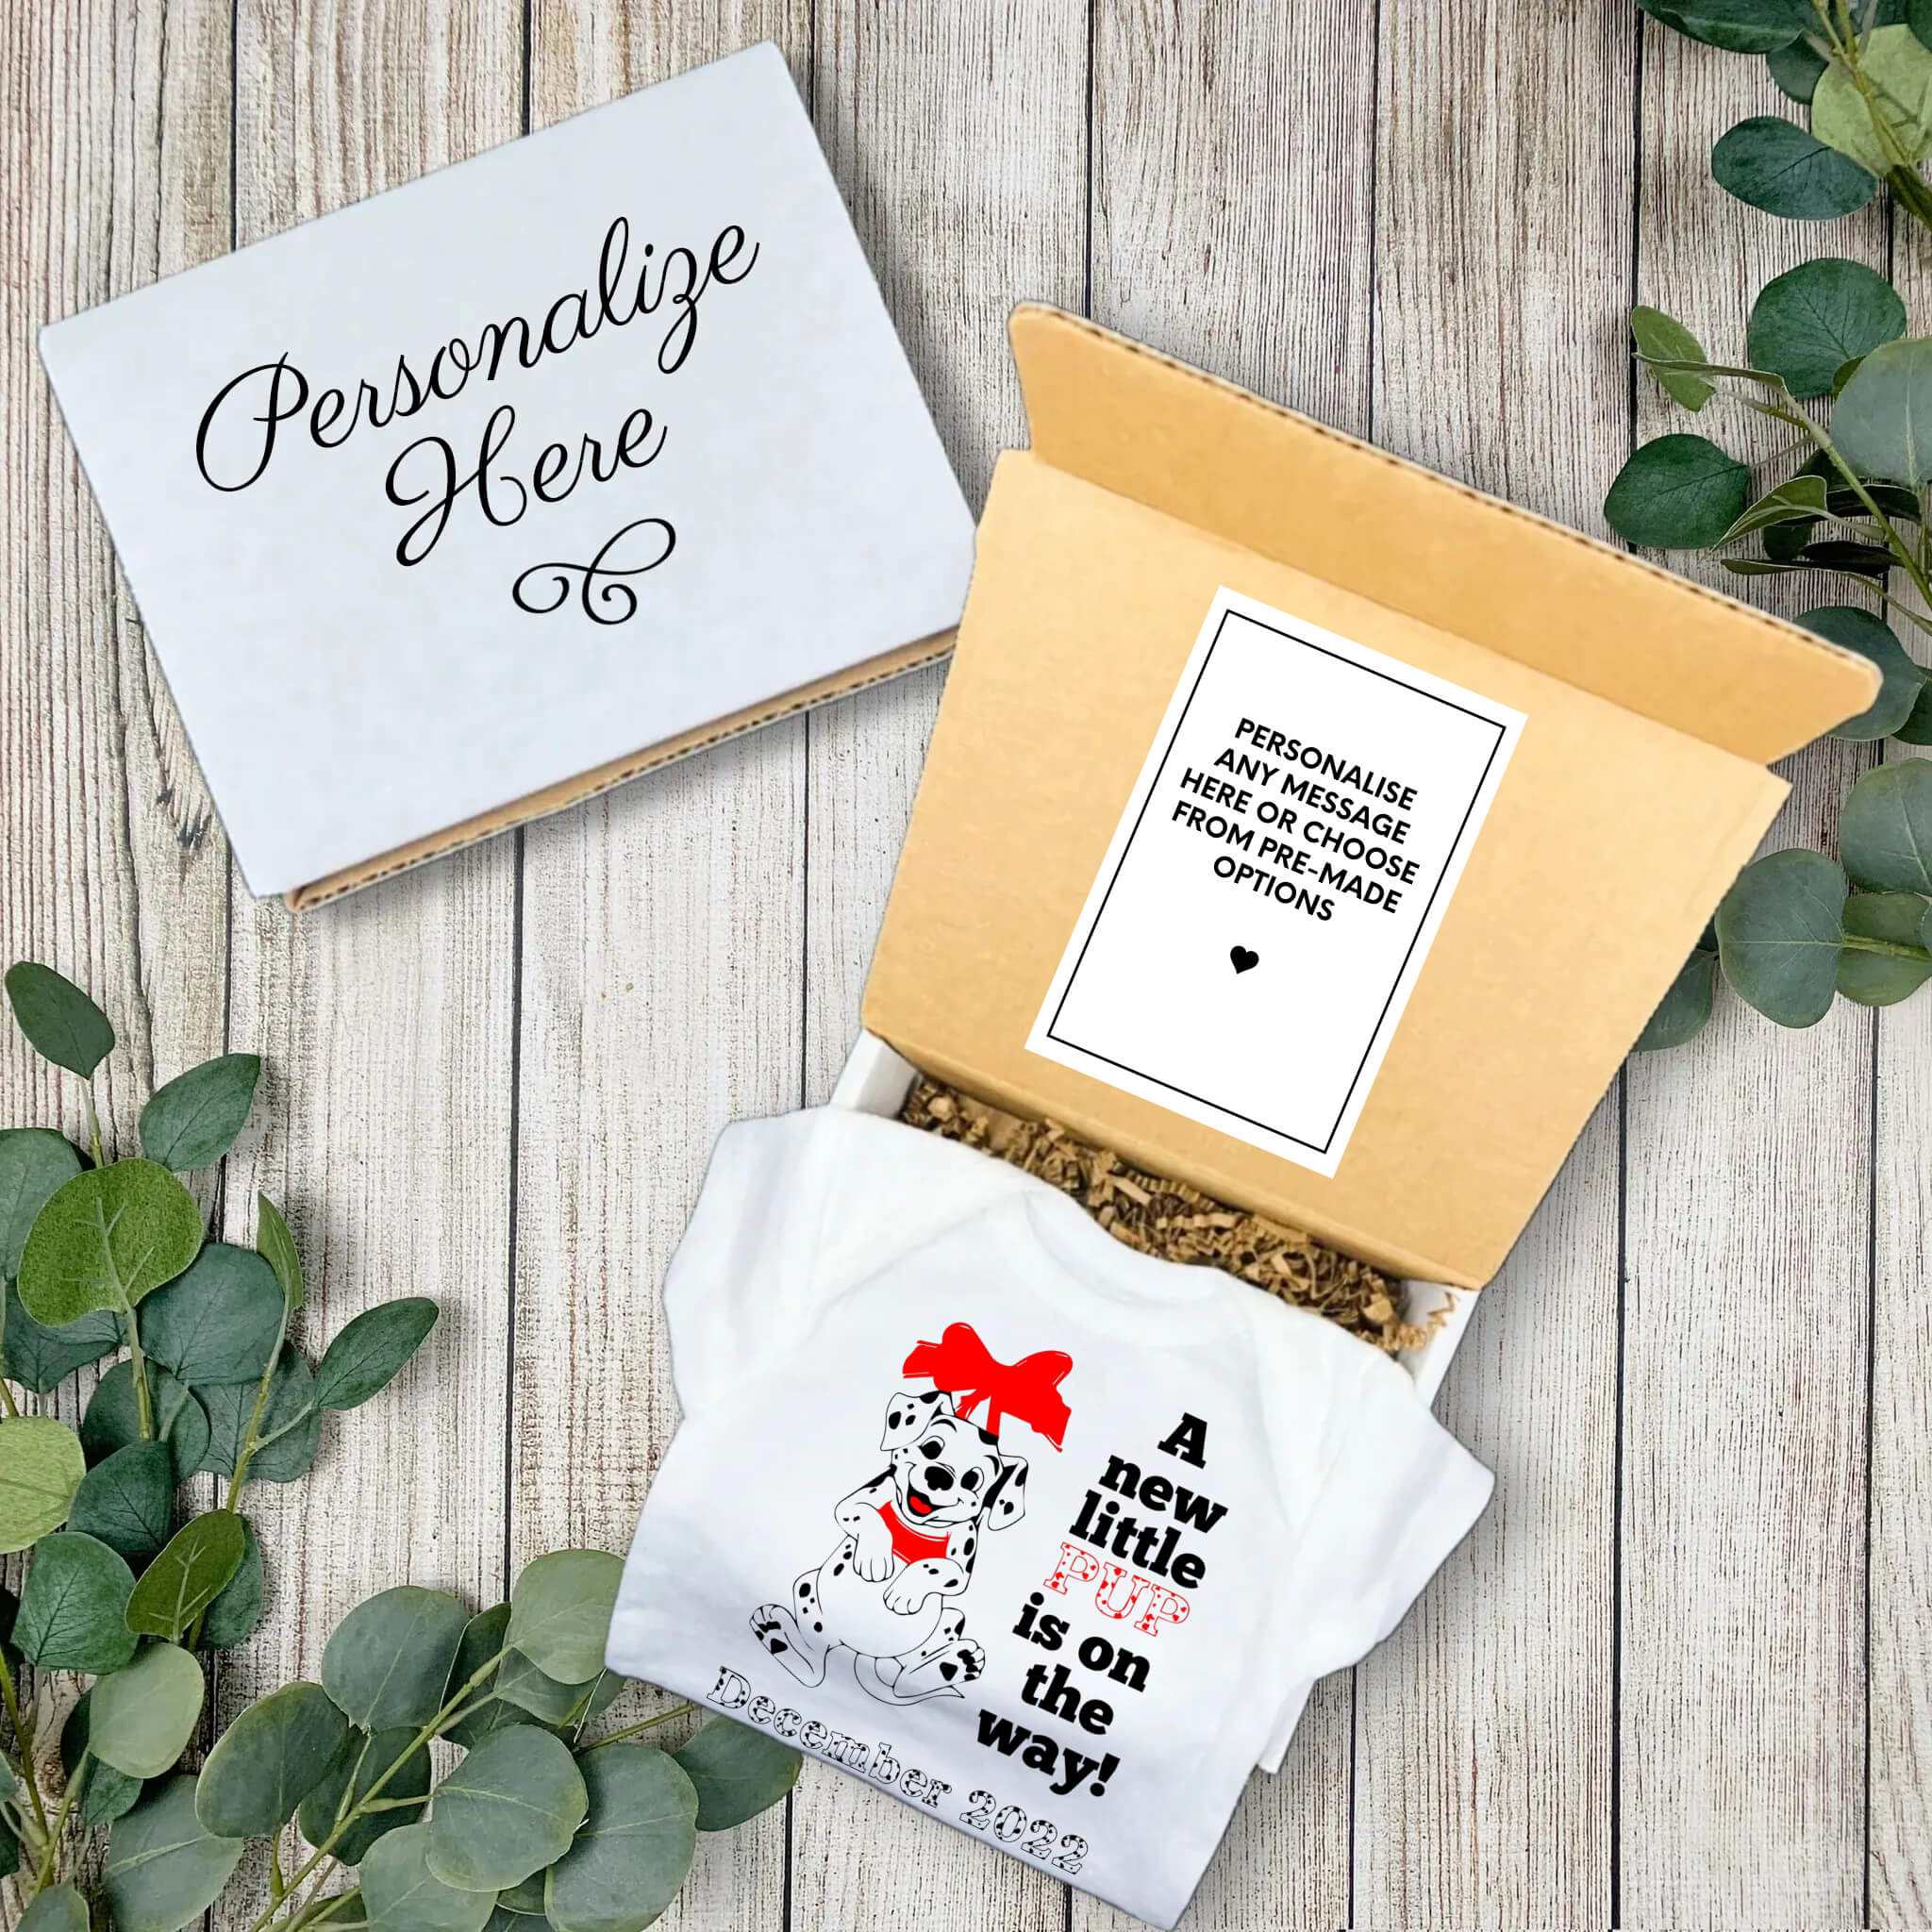 Personalized Pregnancy Announcement A New Little Pup Is On The Way 101 Dalmatians Inspired Customizable Onesie